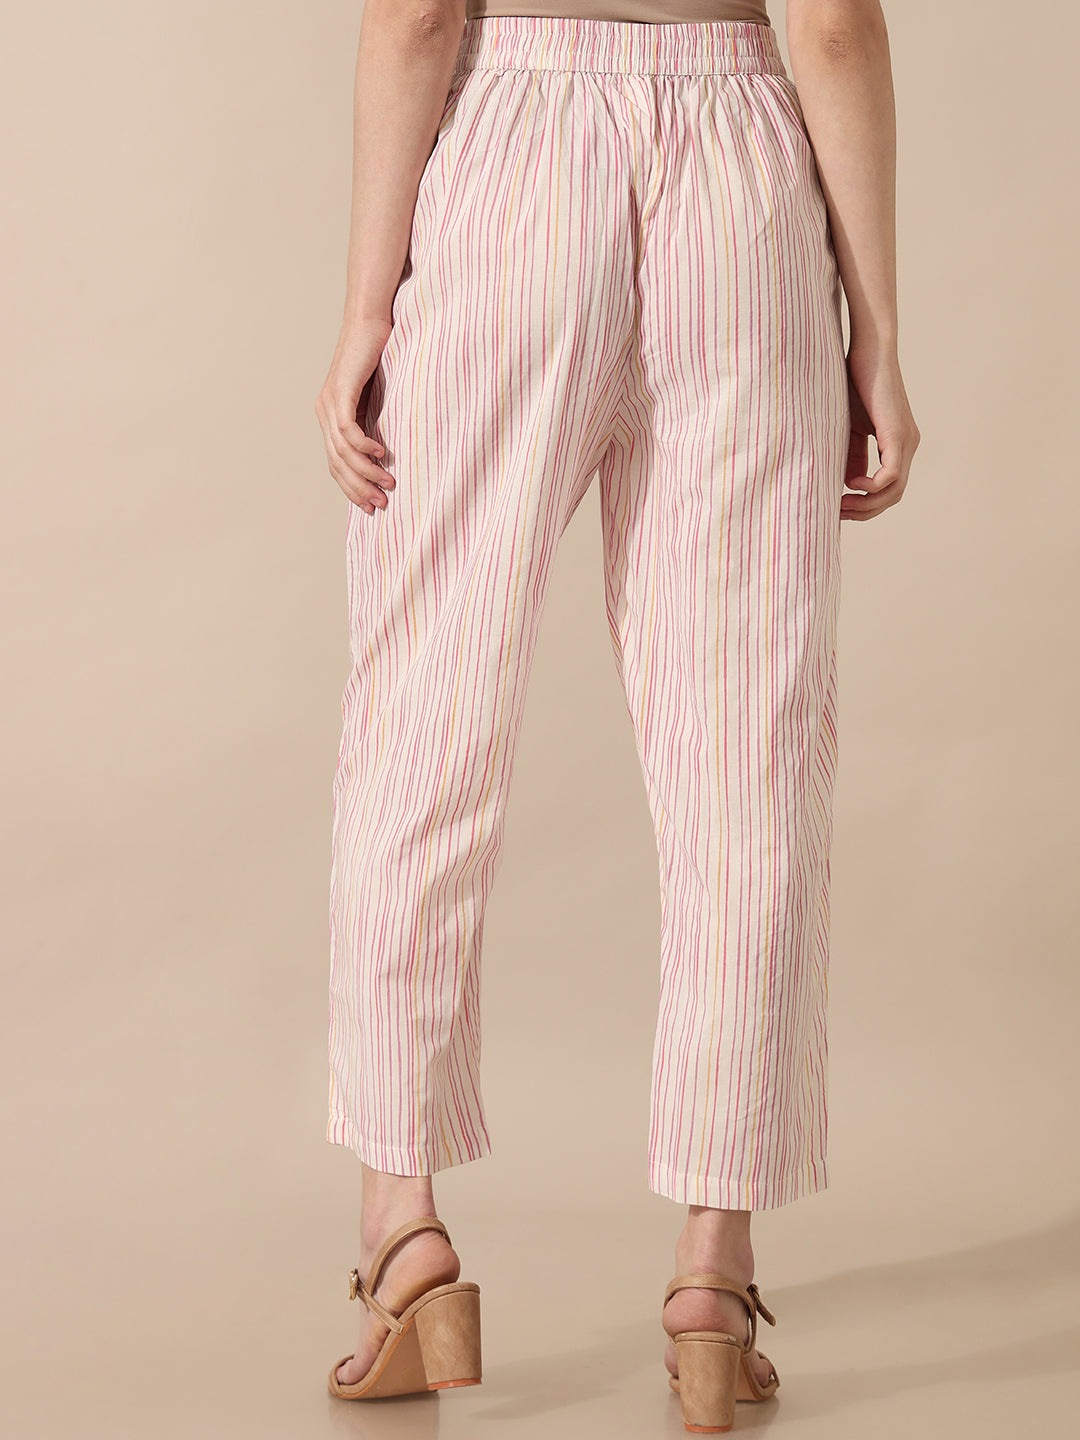 Urban Outfitters Archive Pink Stripe Flare Trousers  Urban Outfitters UK